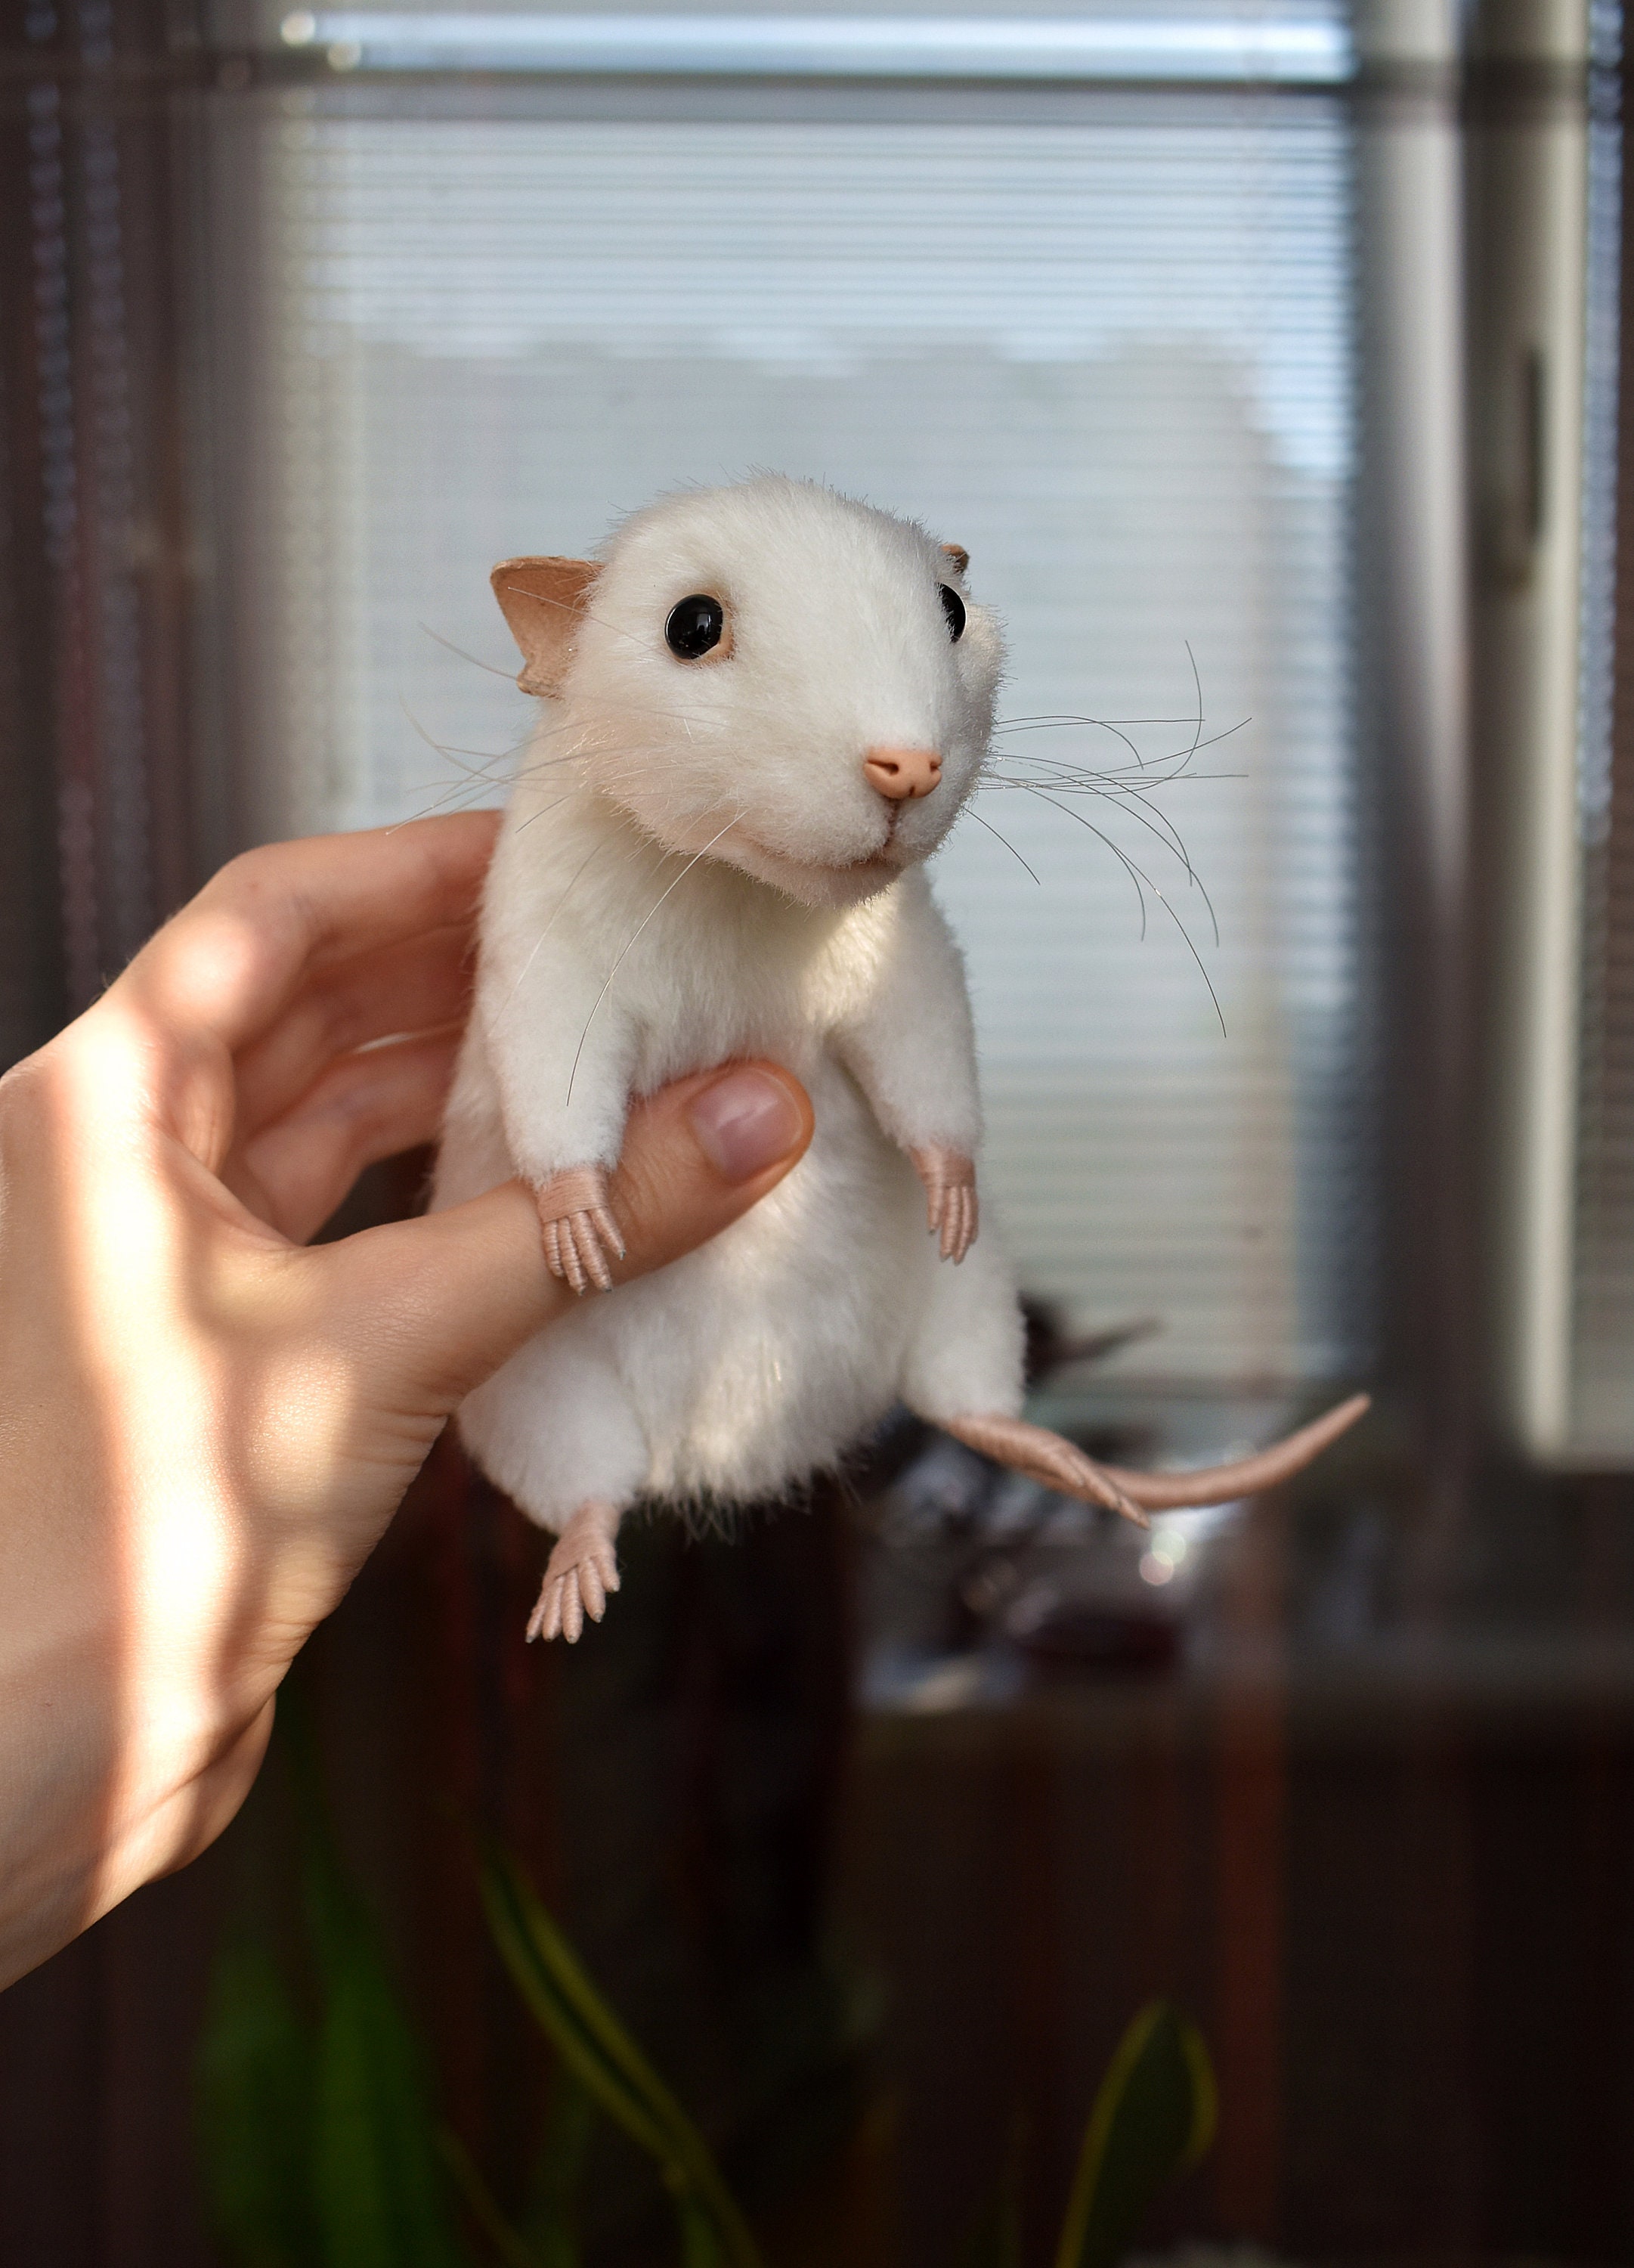 Handmade toy made of polymer clay white rat symbol of 2020 Stock